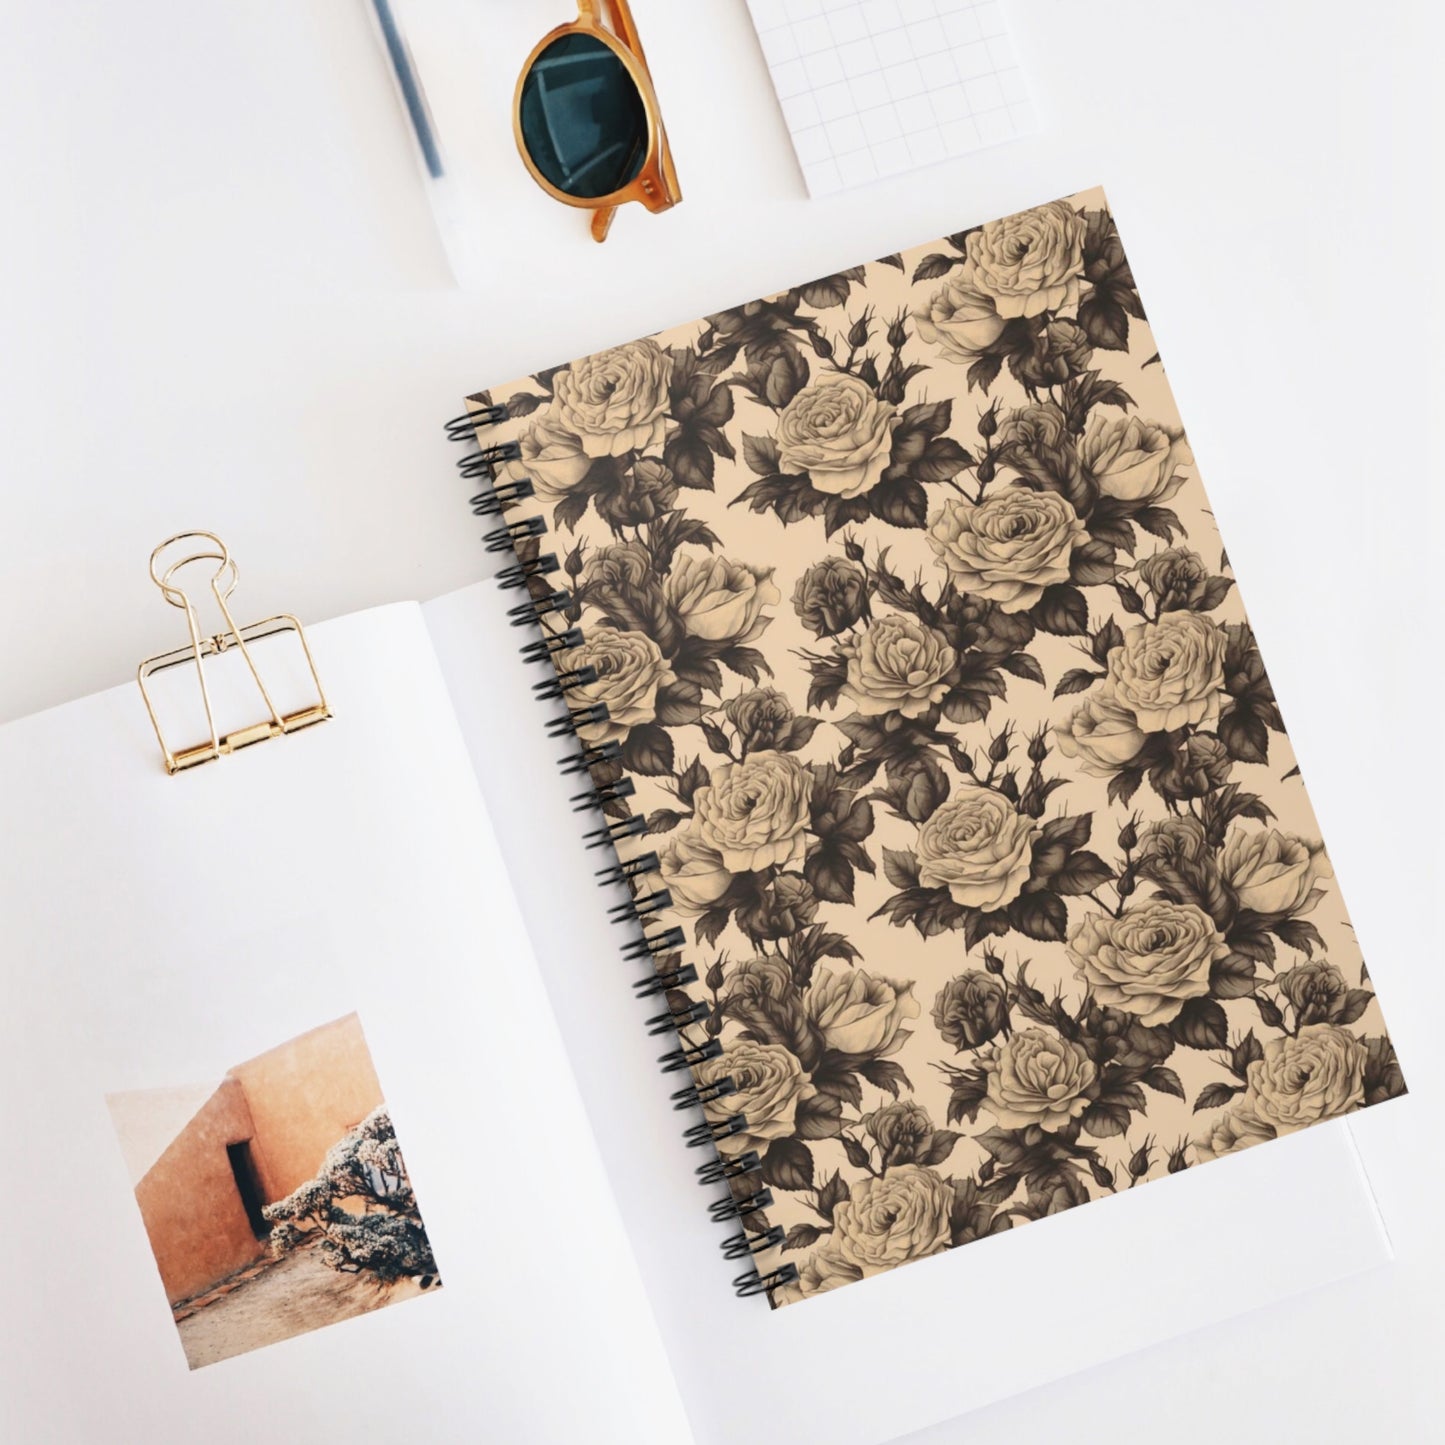 Black and Ivory Roses | Ruled Line Spiral Notebook